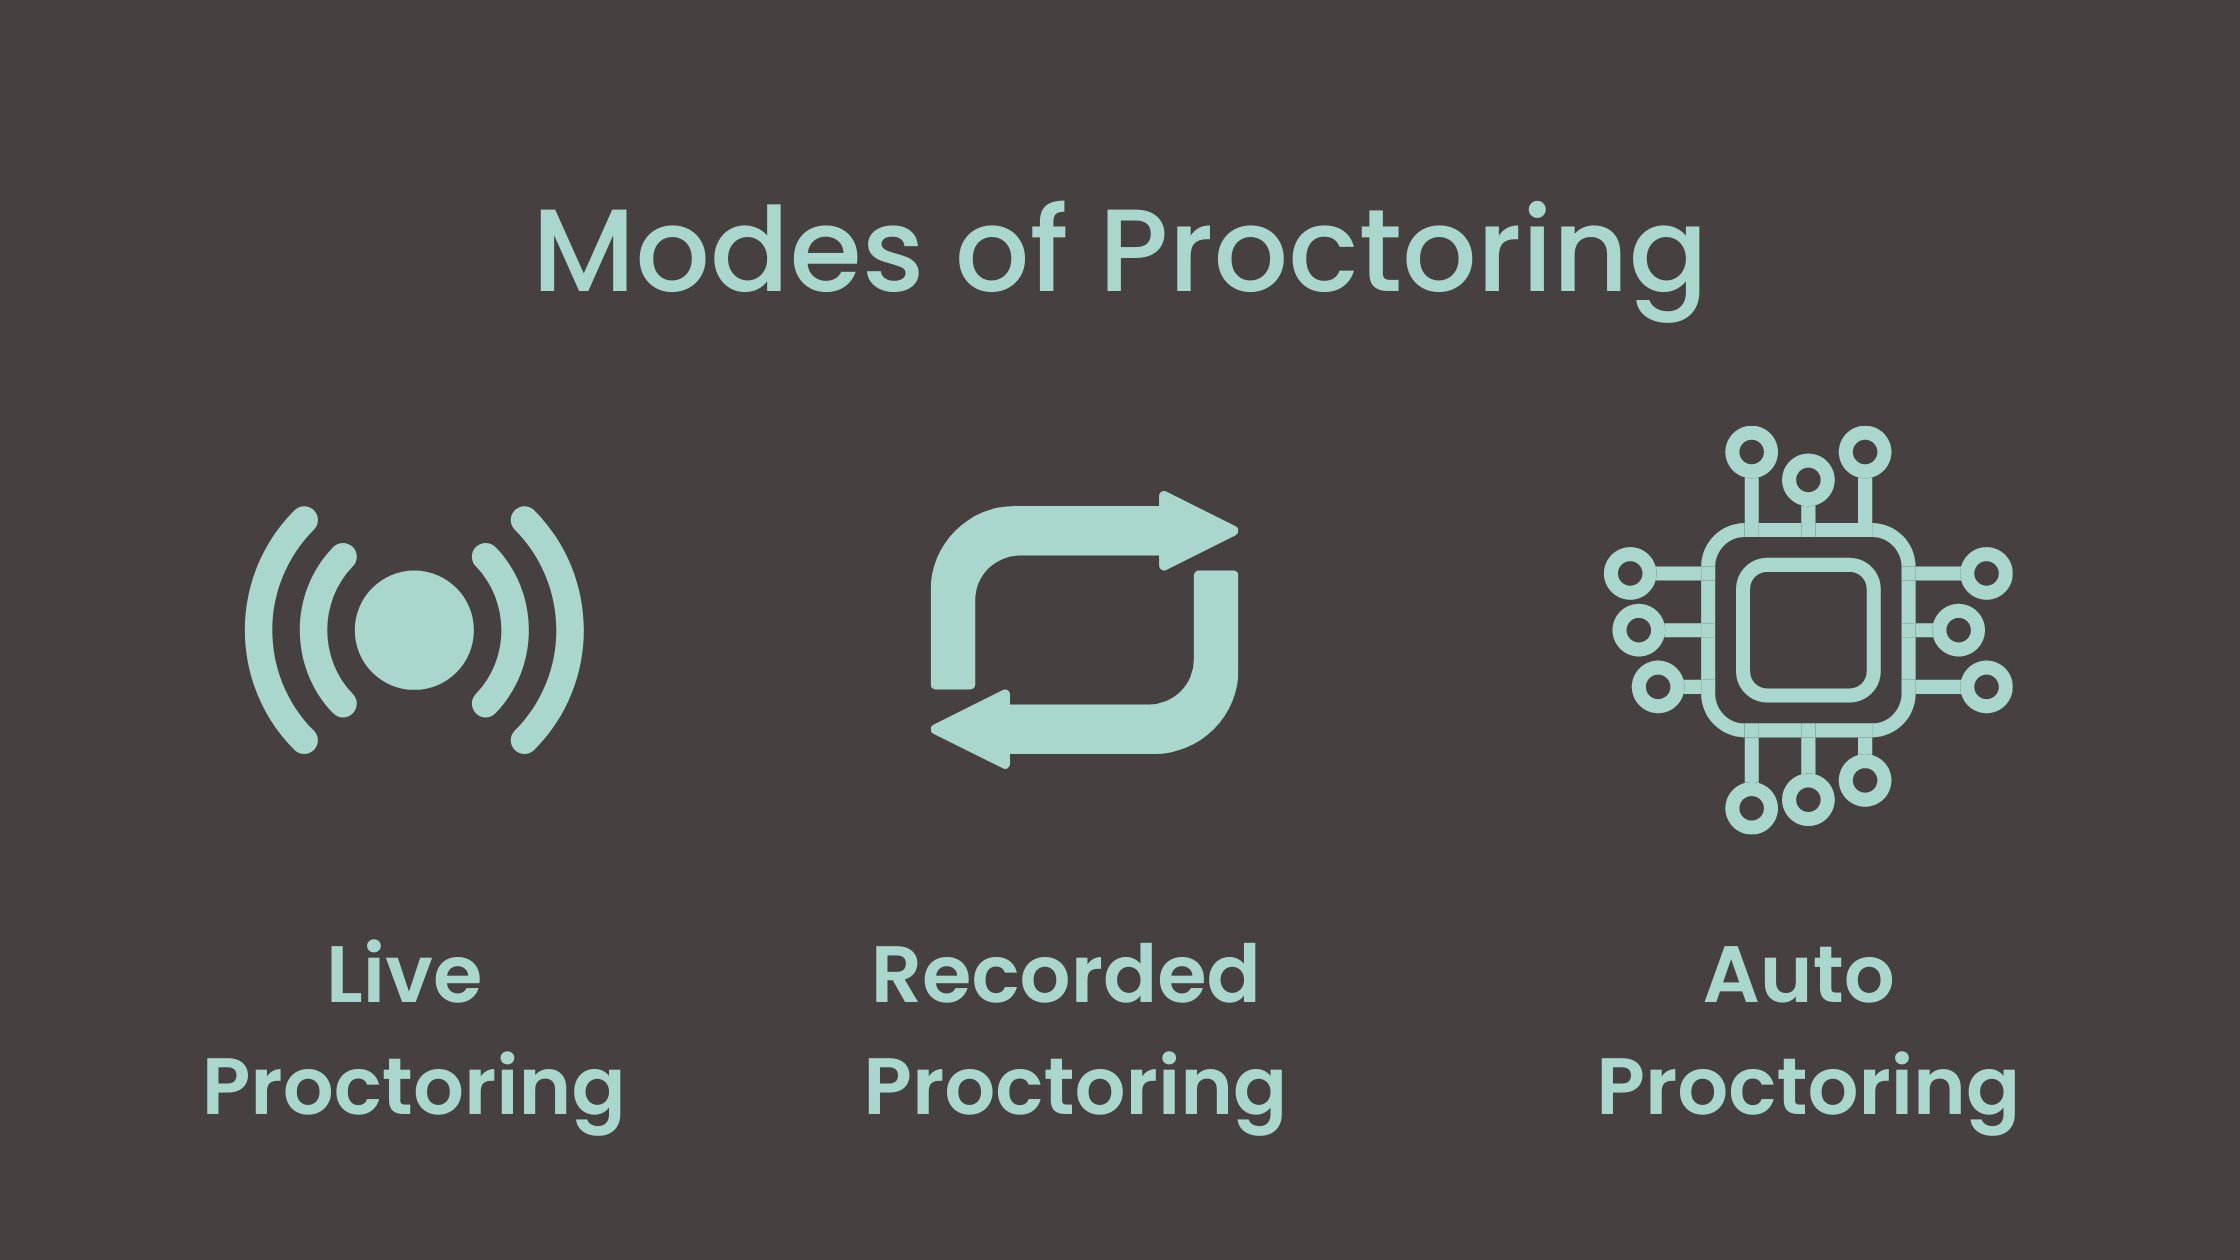 Modes of Proctoring Through Learning Management Systems